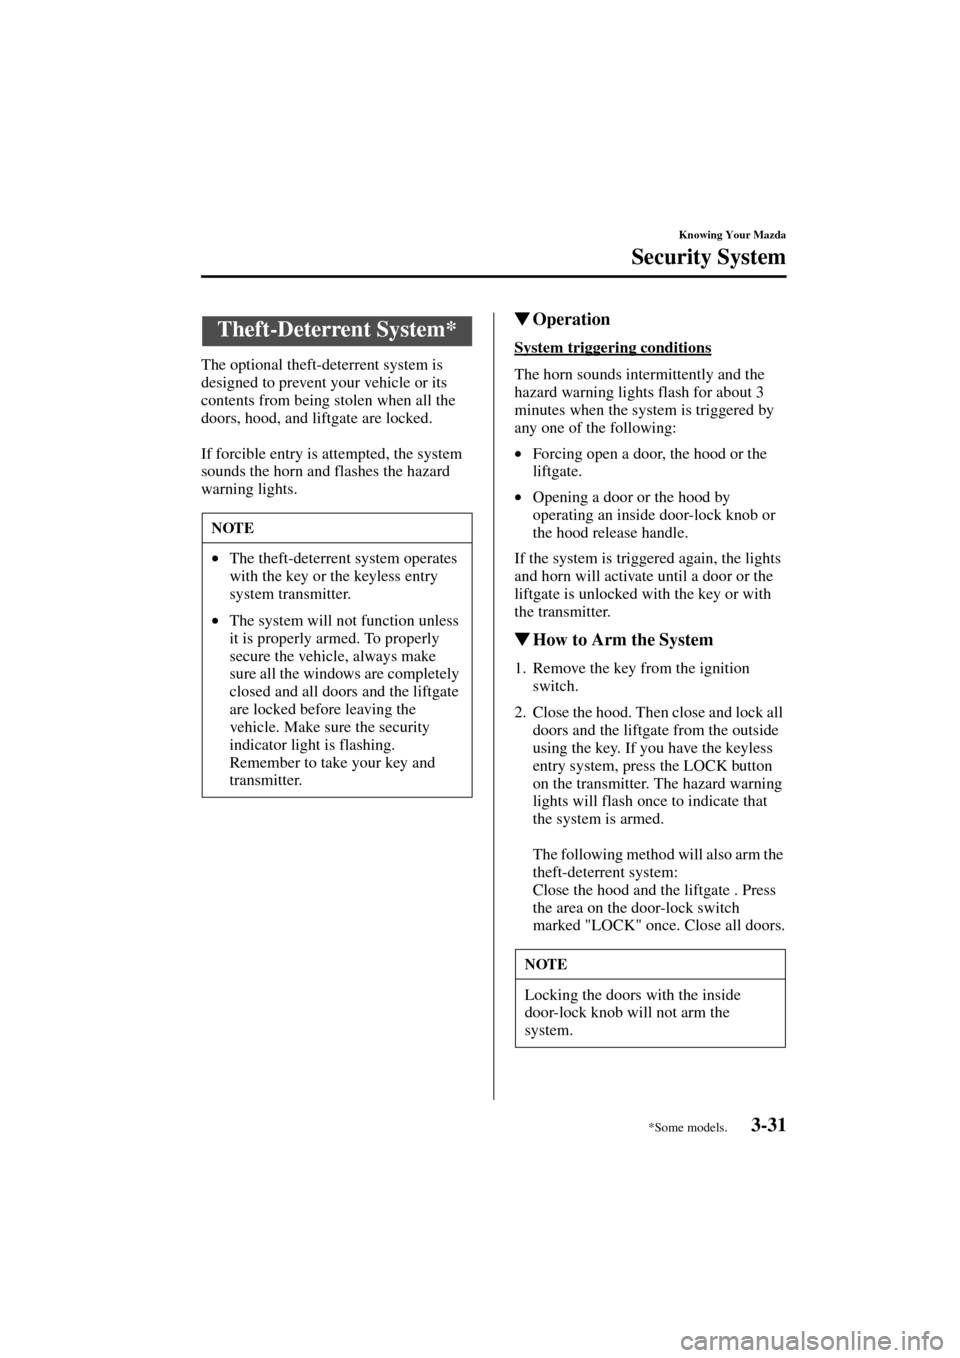 MAZDA MODEL MPV 2004  Owners Manual (in English) 3-31
Knowing Your Mazda
Security System
Form No. 8S06-EA-03H
The optional theft-deterrent system is 
designed to prevent your vehicle or its 
contents from being stolen when all the 
doors, hood, and 